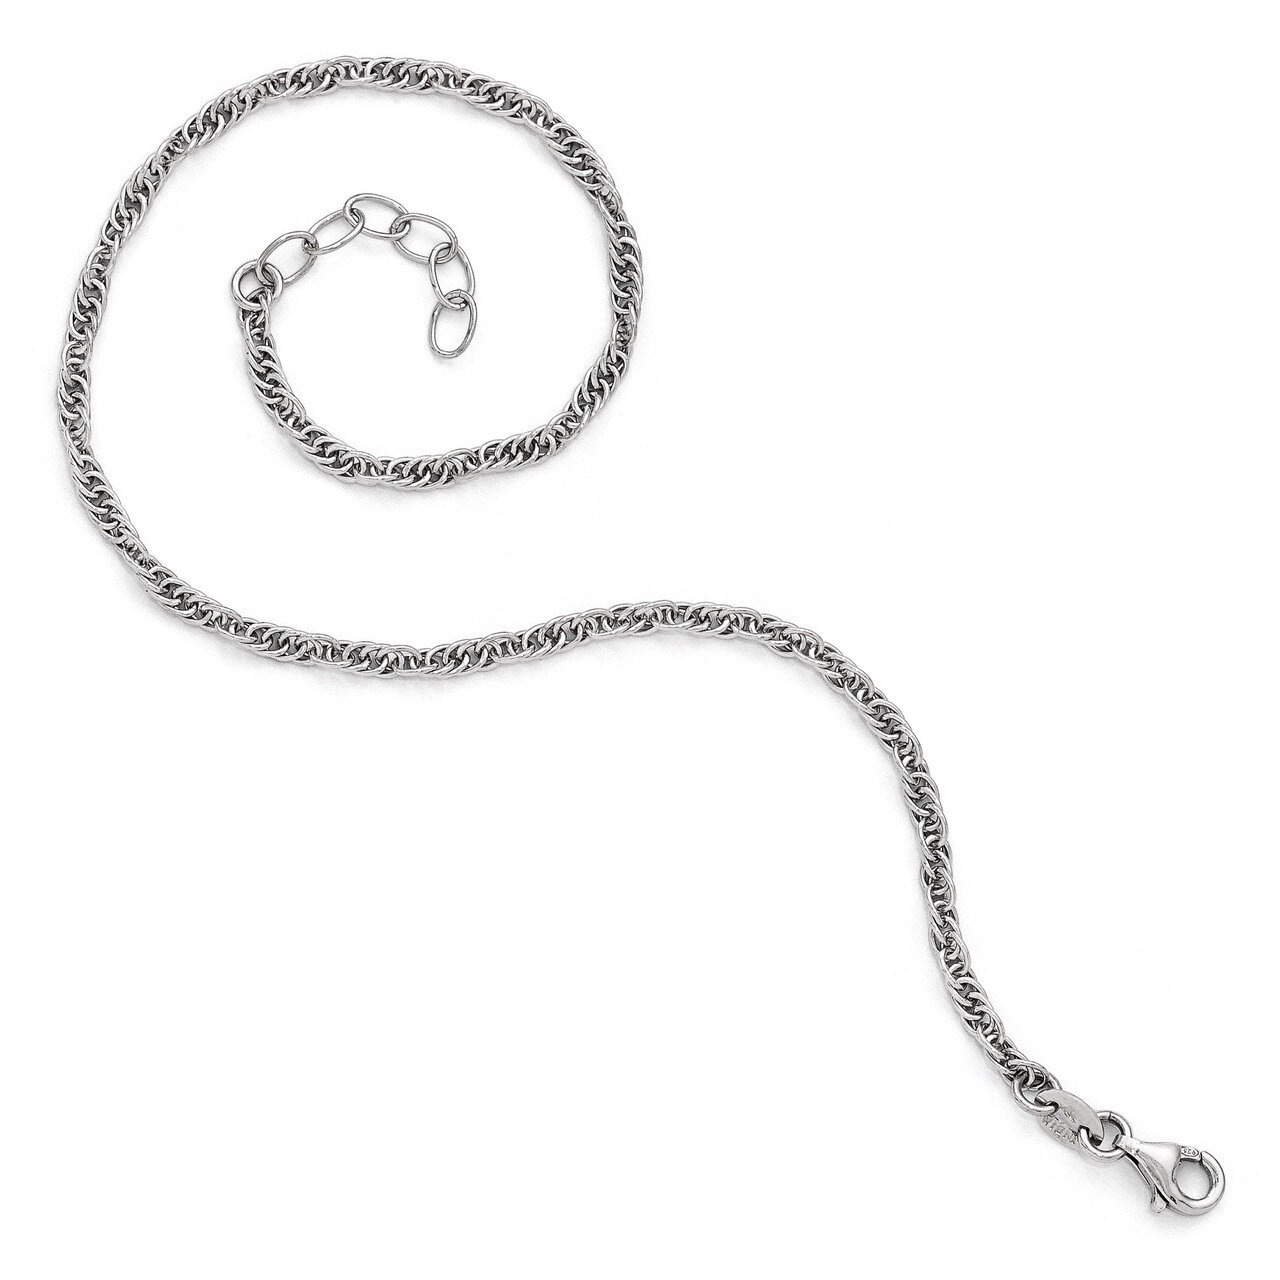 Fancy Chain Anklet 10.5 Inch - Sterling Silver HB-QLF515-10.5